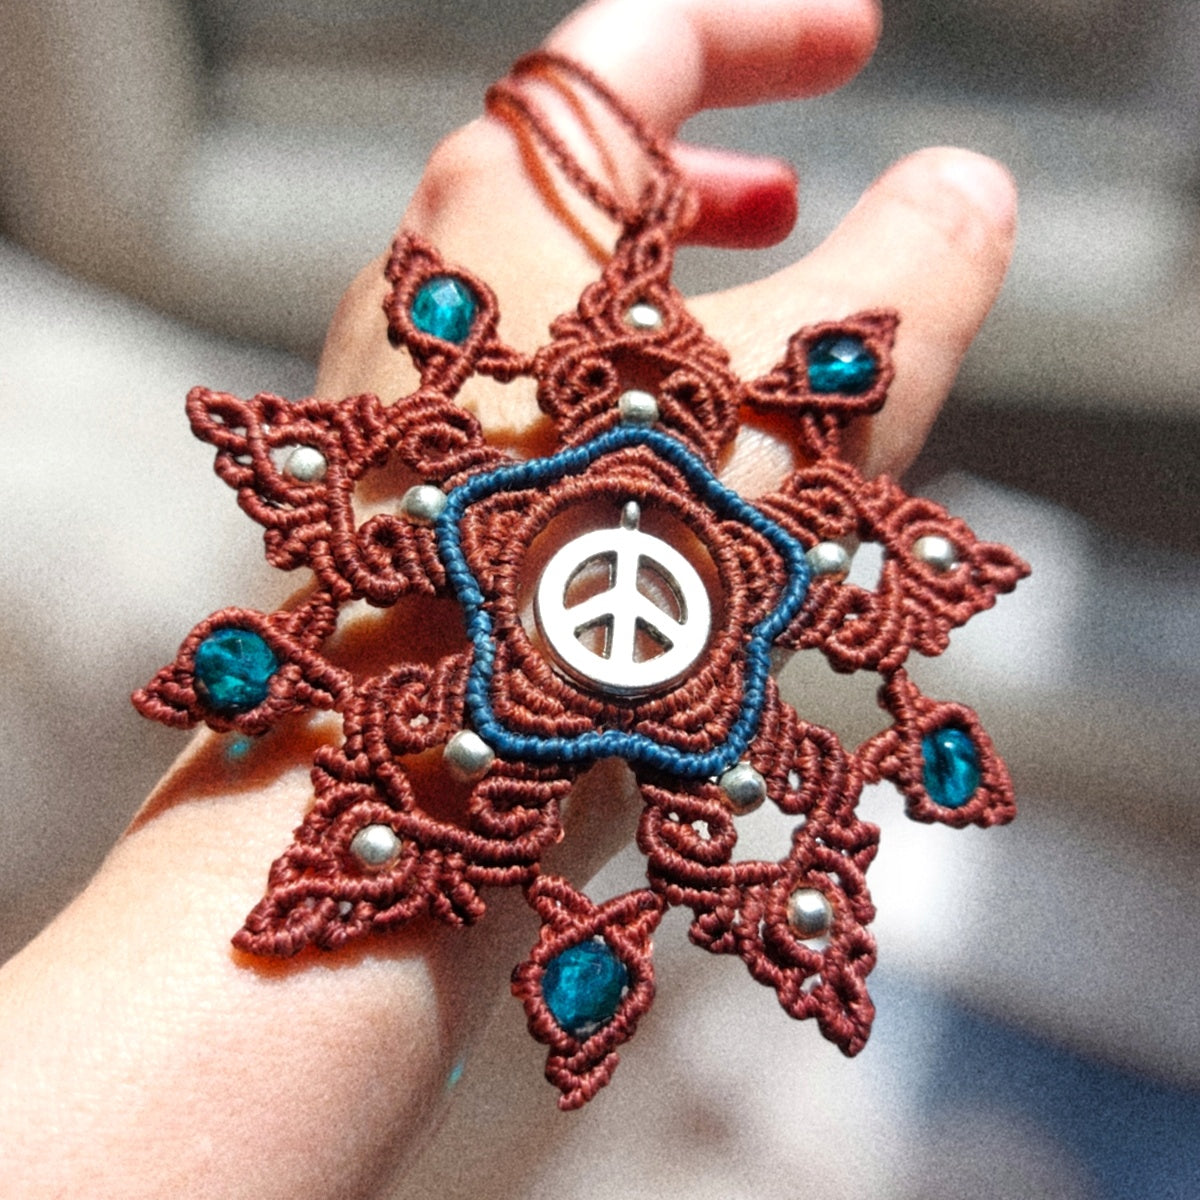 The Macrame Mandala Necklace features a peace symbol charm and brass beads. Measuring approximately 55cm /21.8 Inches in total length, the necklace is adjustable with a slide lock for a comfortable fit.